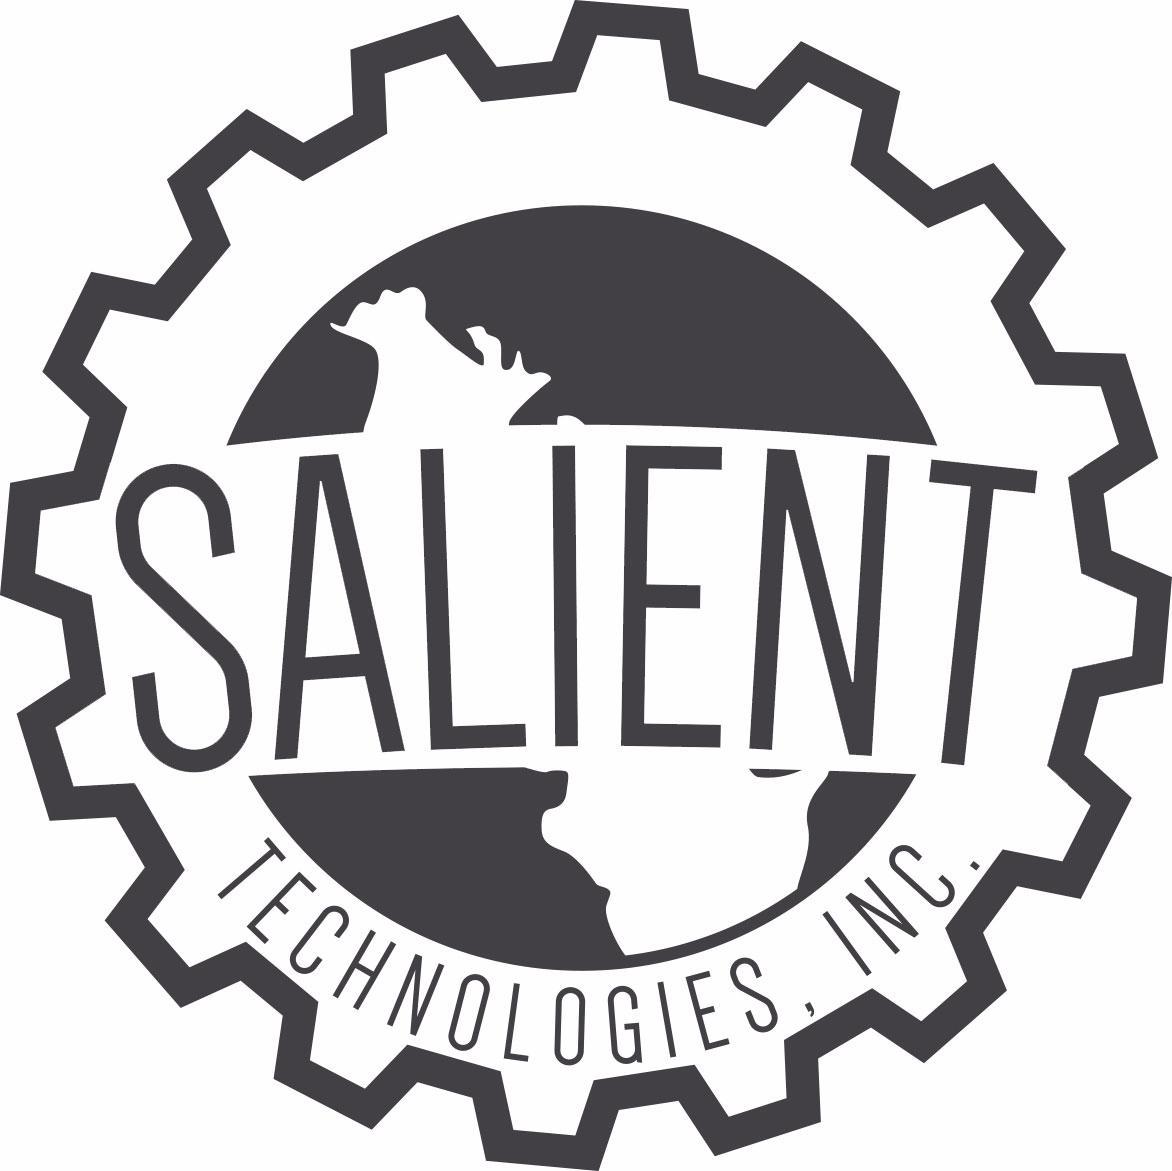 Salient Technologies, Inc. is a  creative product development firm specializing in turning your ideas into reality. We are located in beautiful Bozeman, MT.